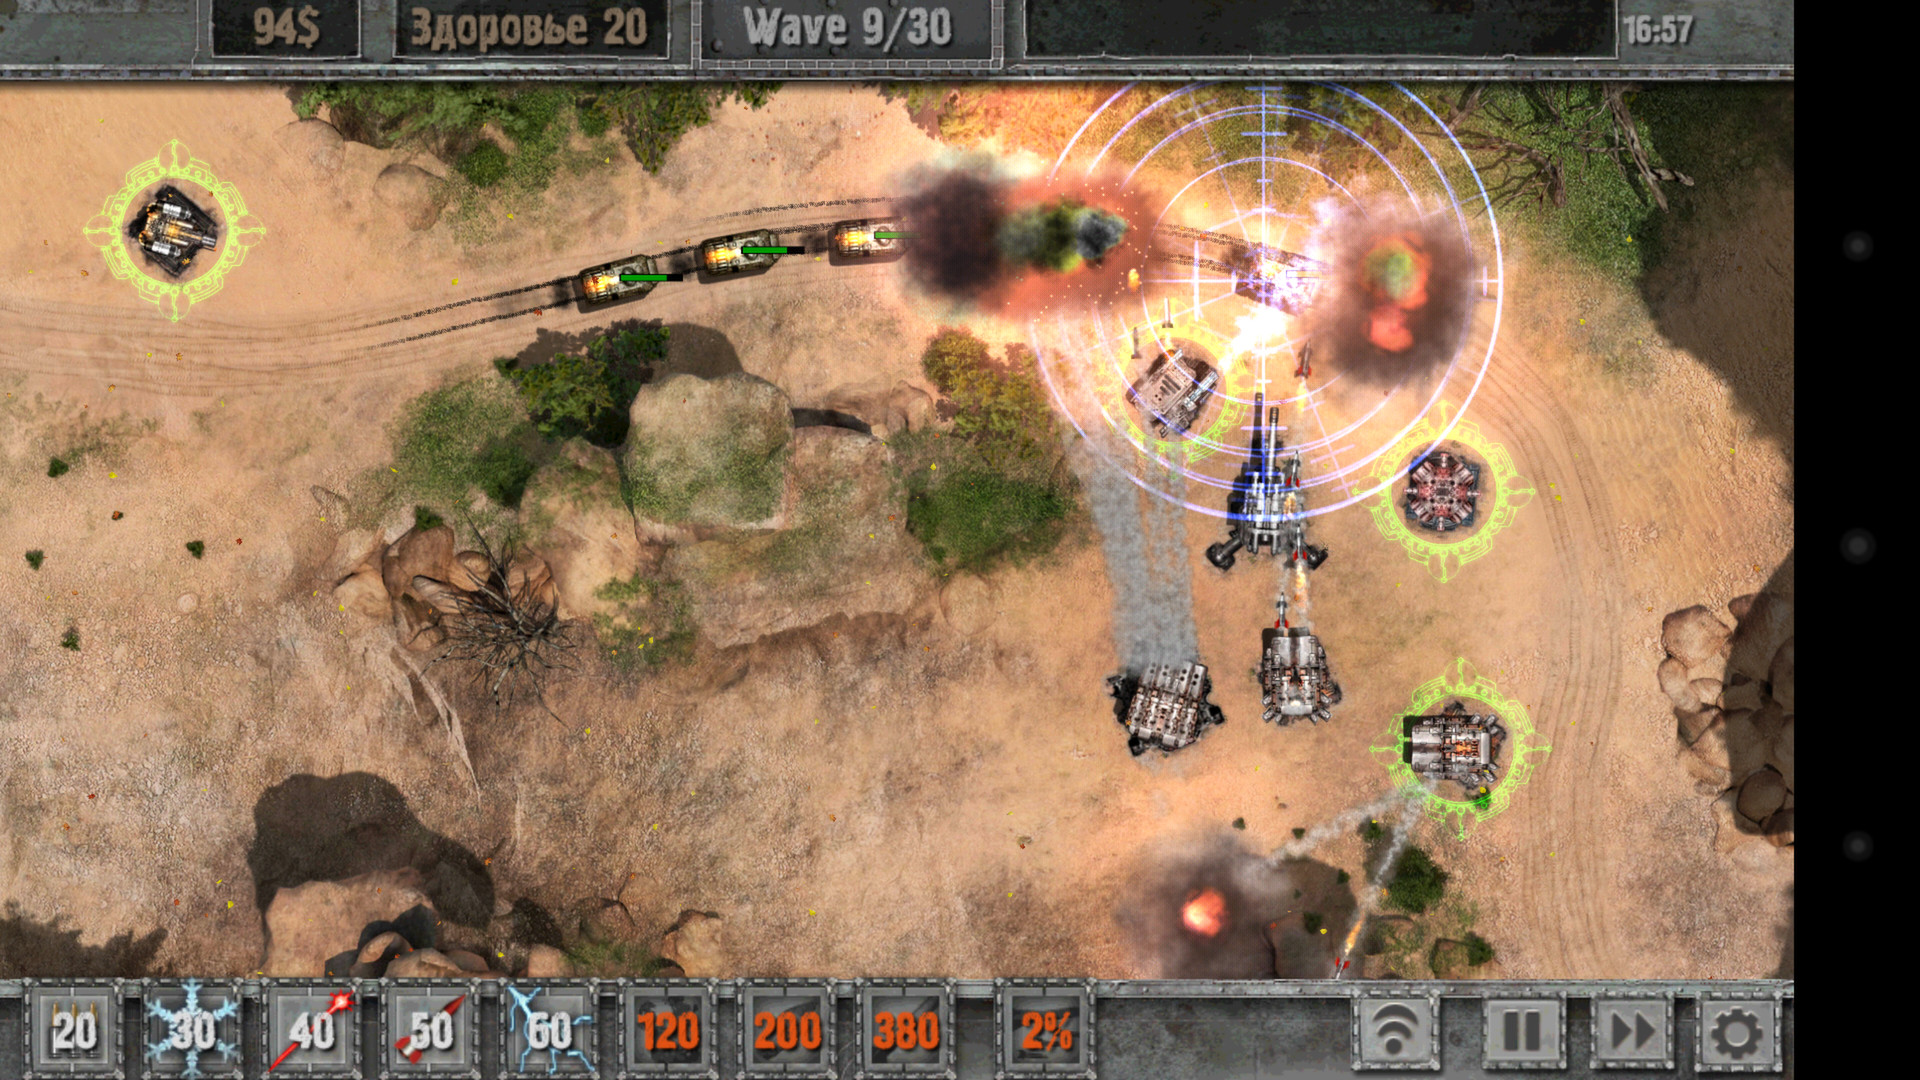 free download defense zone 2 for pc